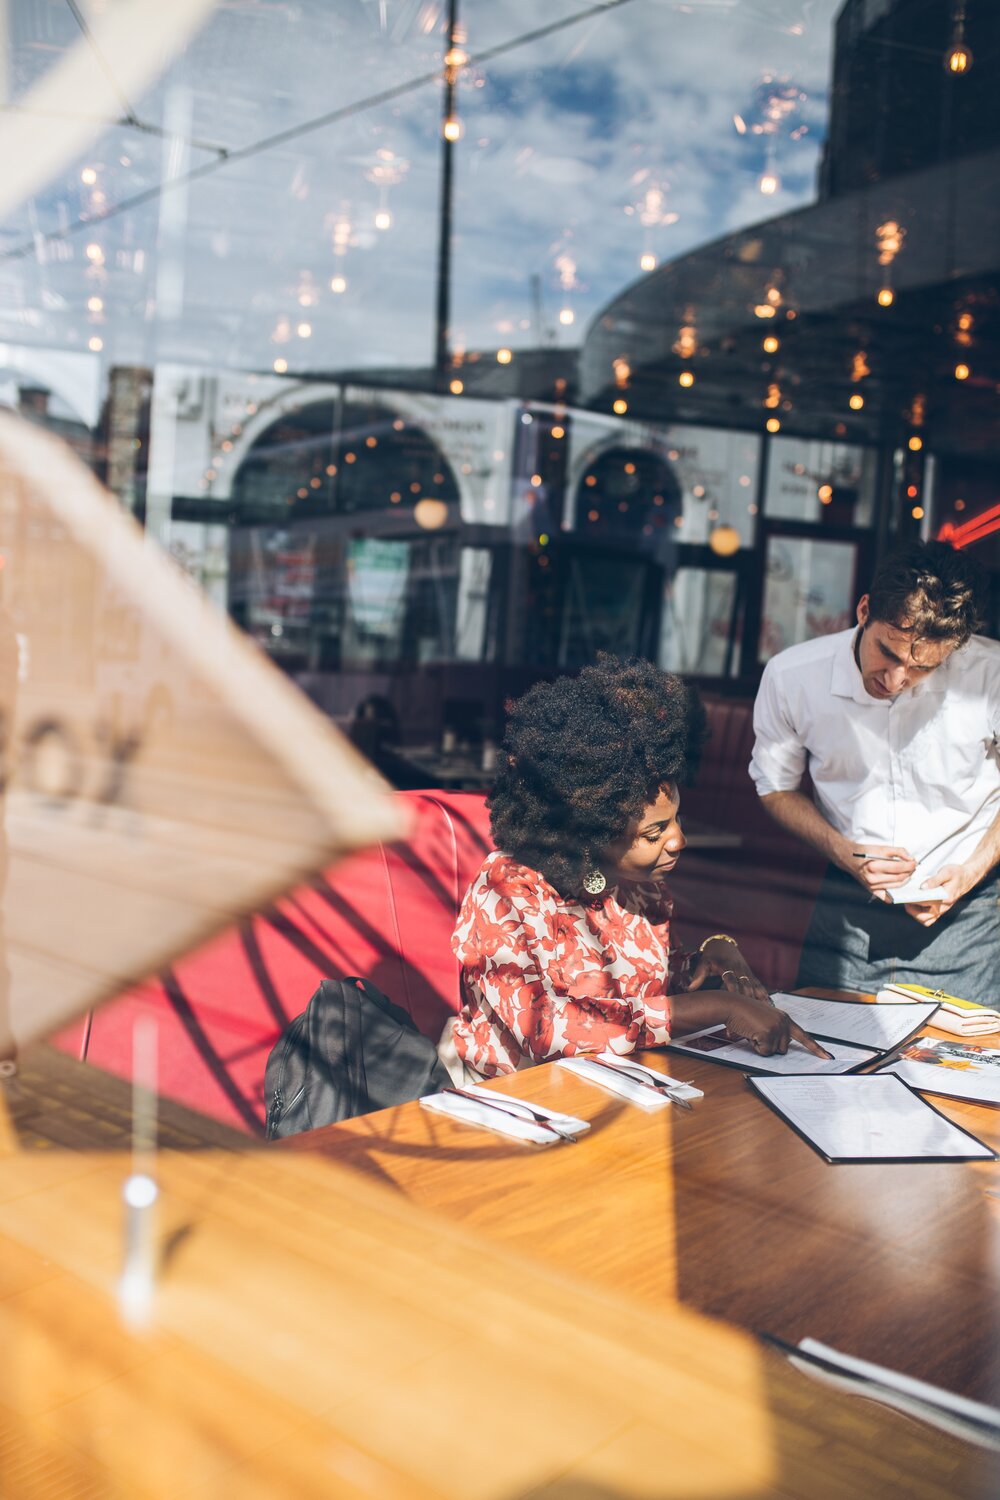 Stock photo of a woman placing her order in a restaurant. Photo: Fraser Cottrell/Unsplash